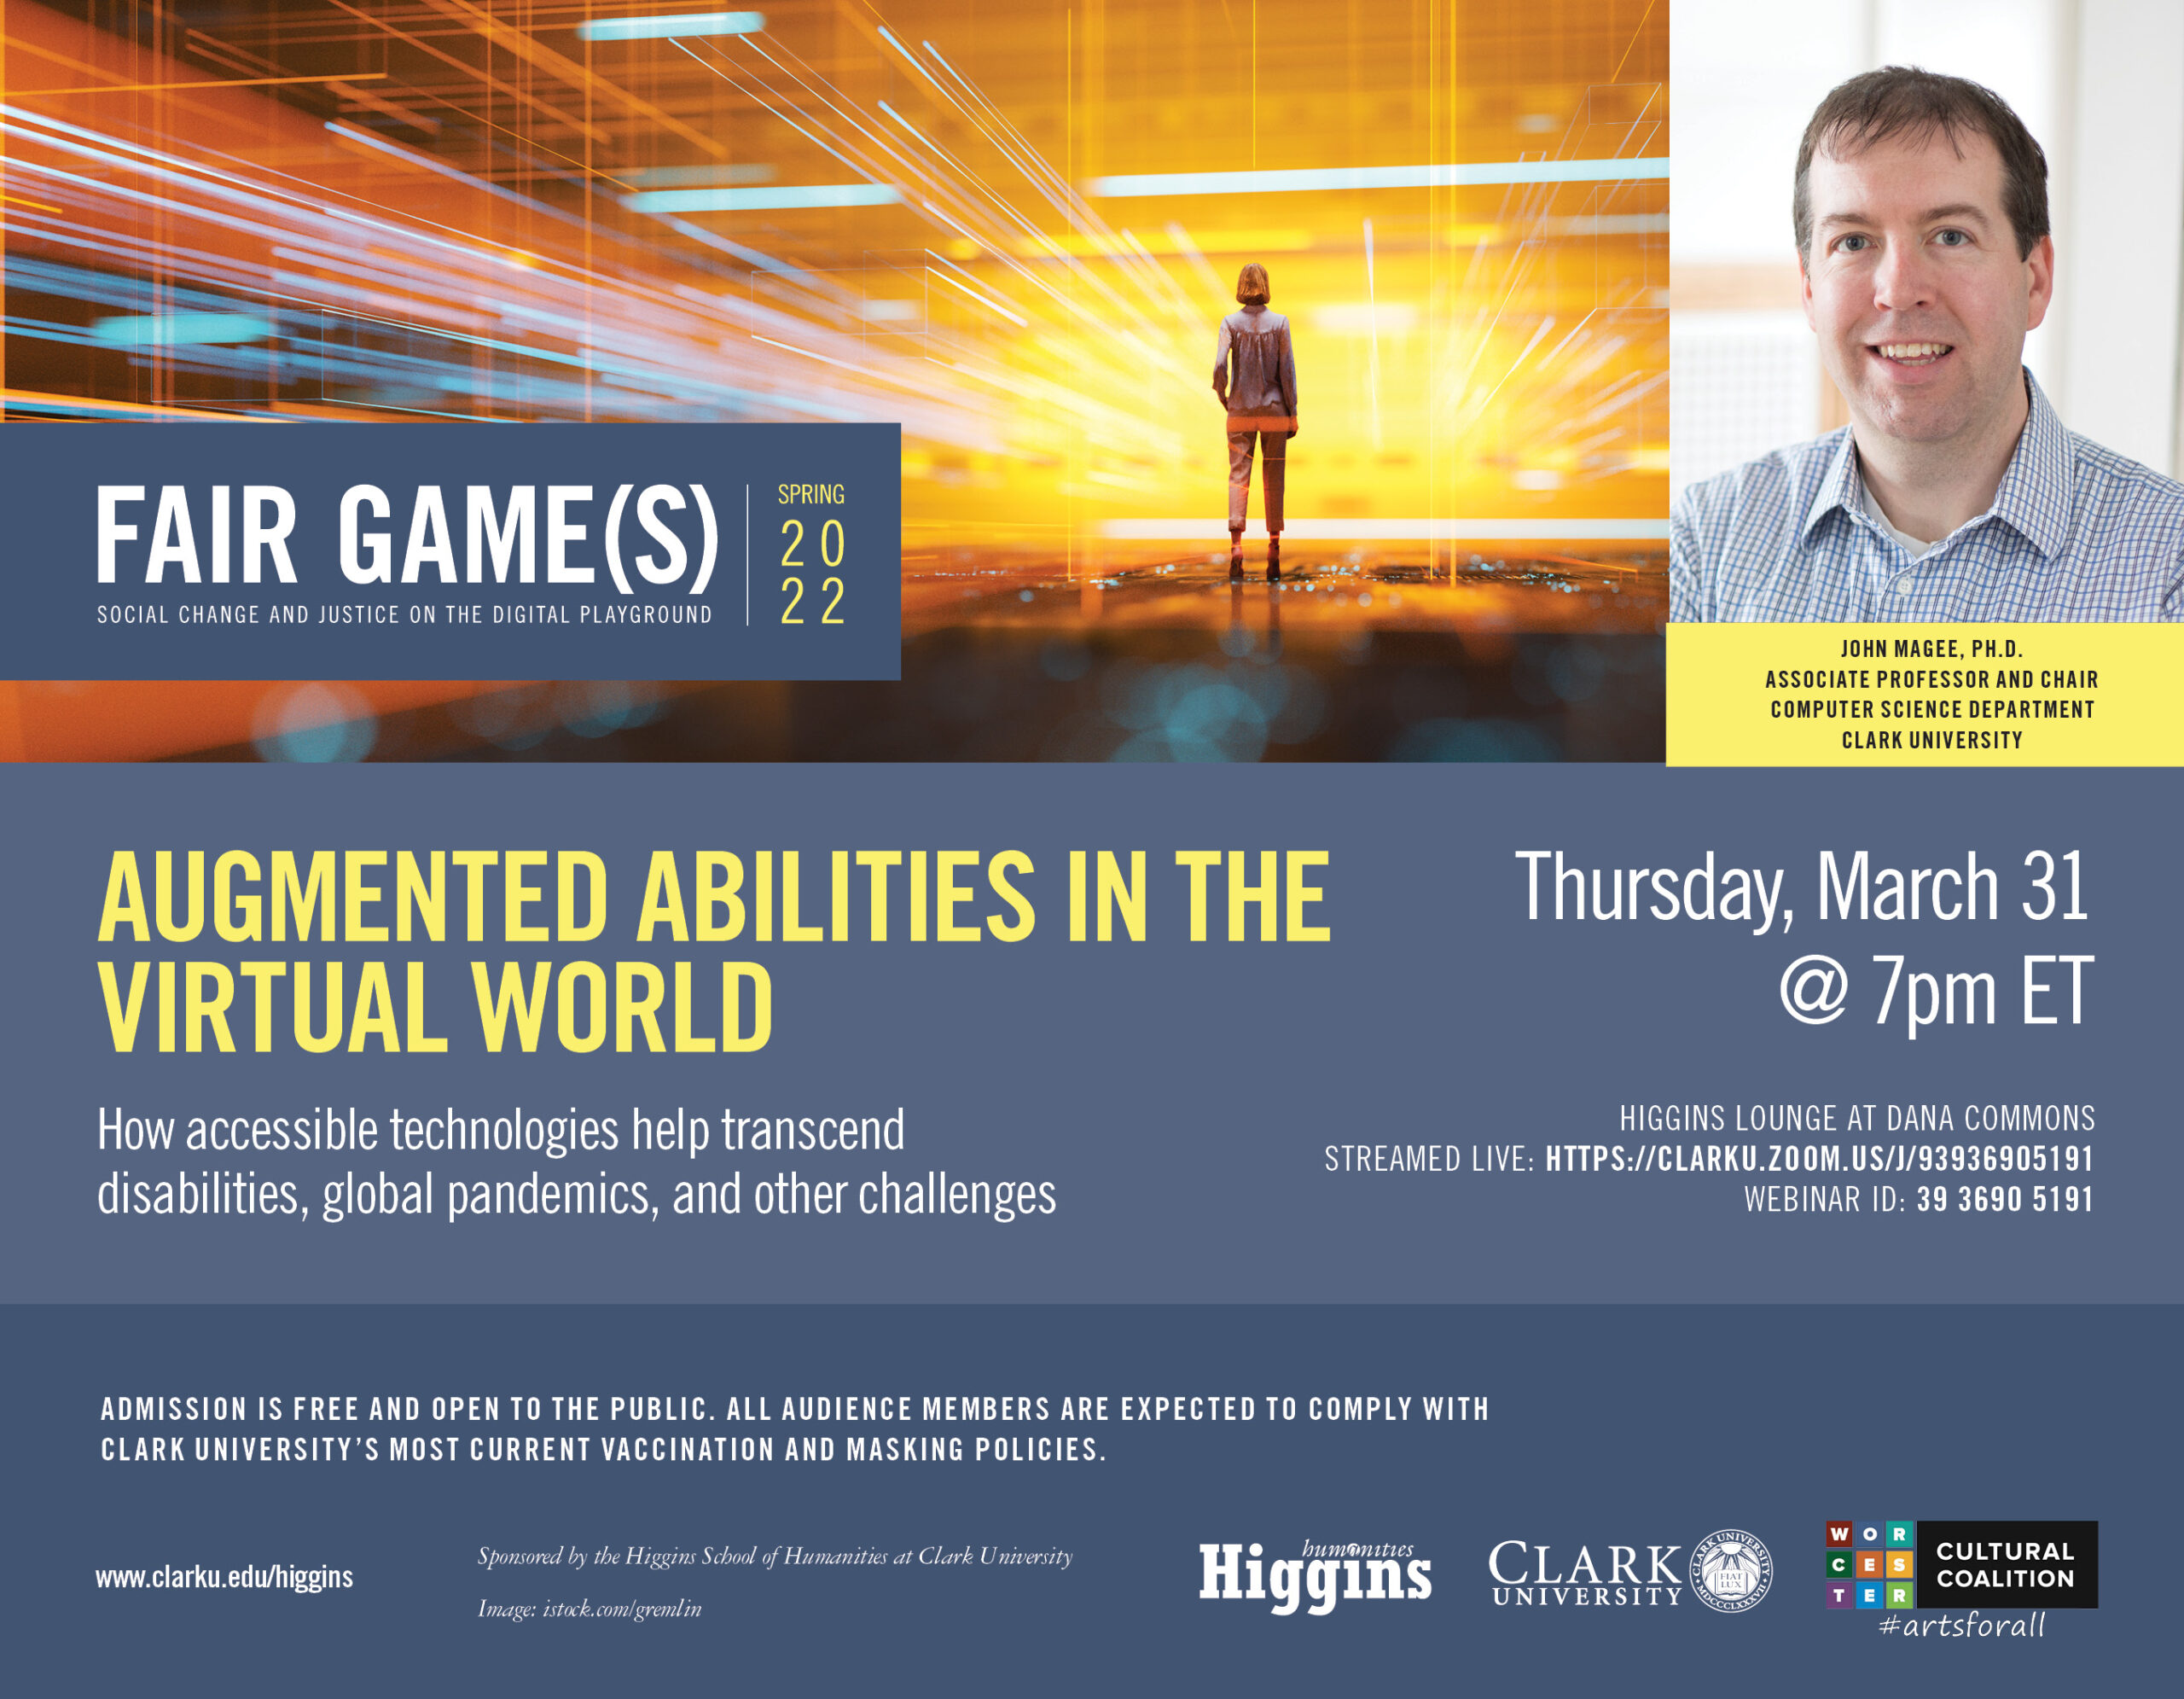 To publicize Professor Magee talk on the virtual world